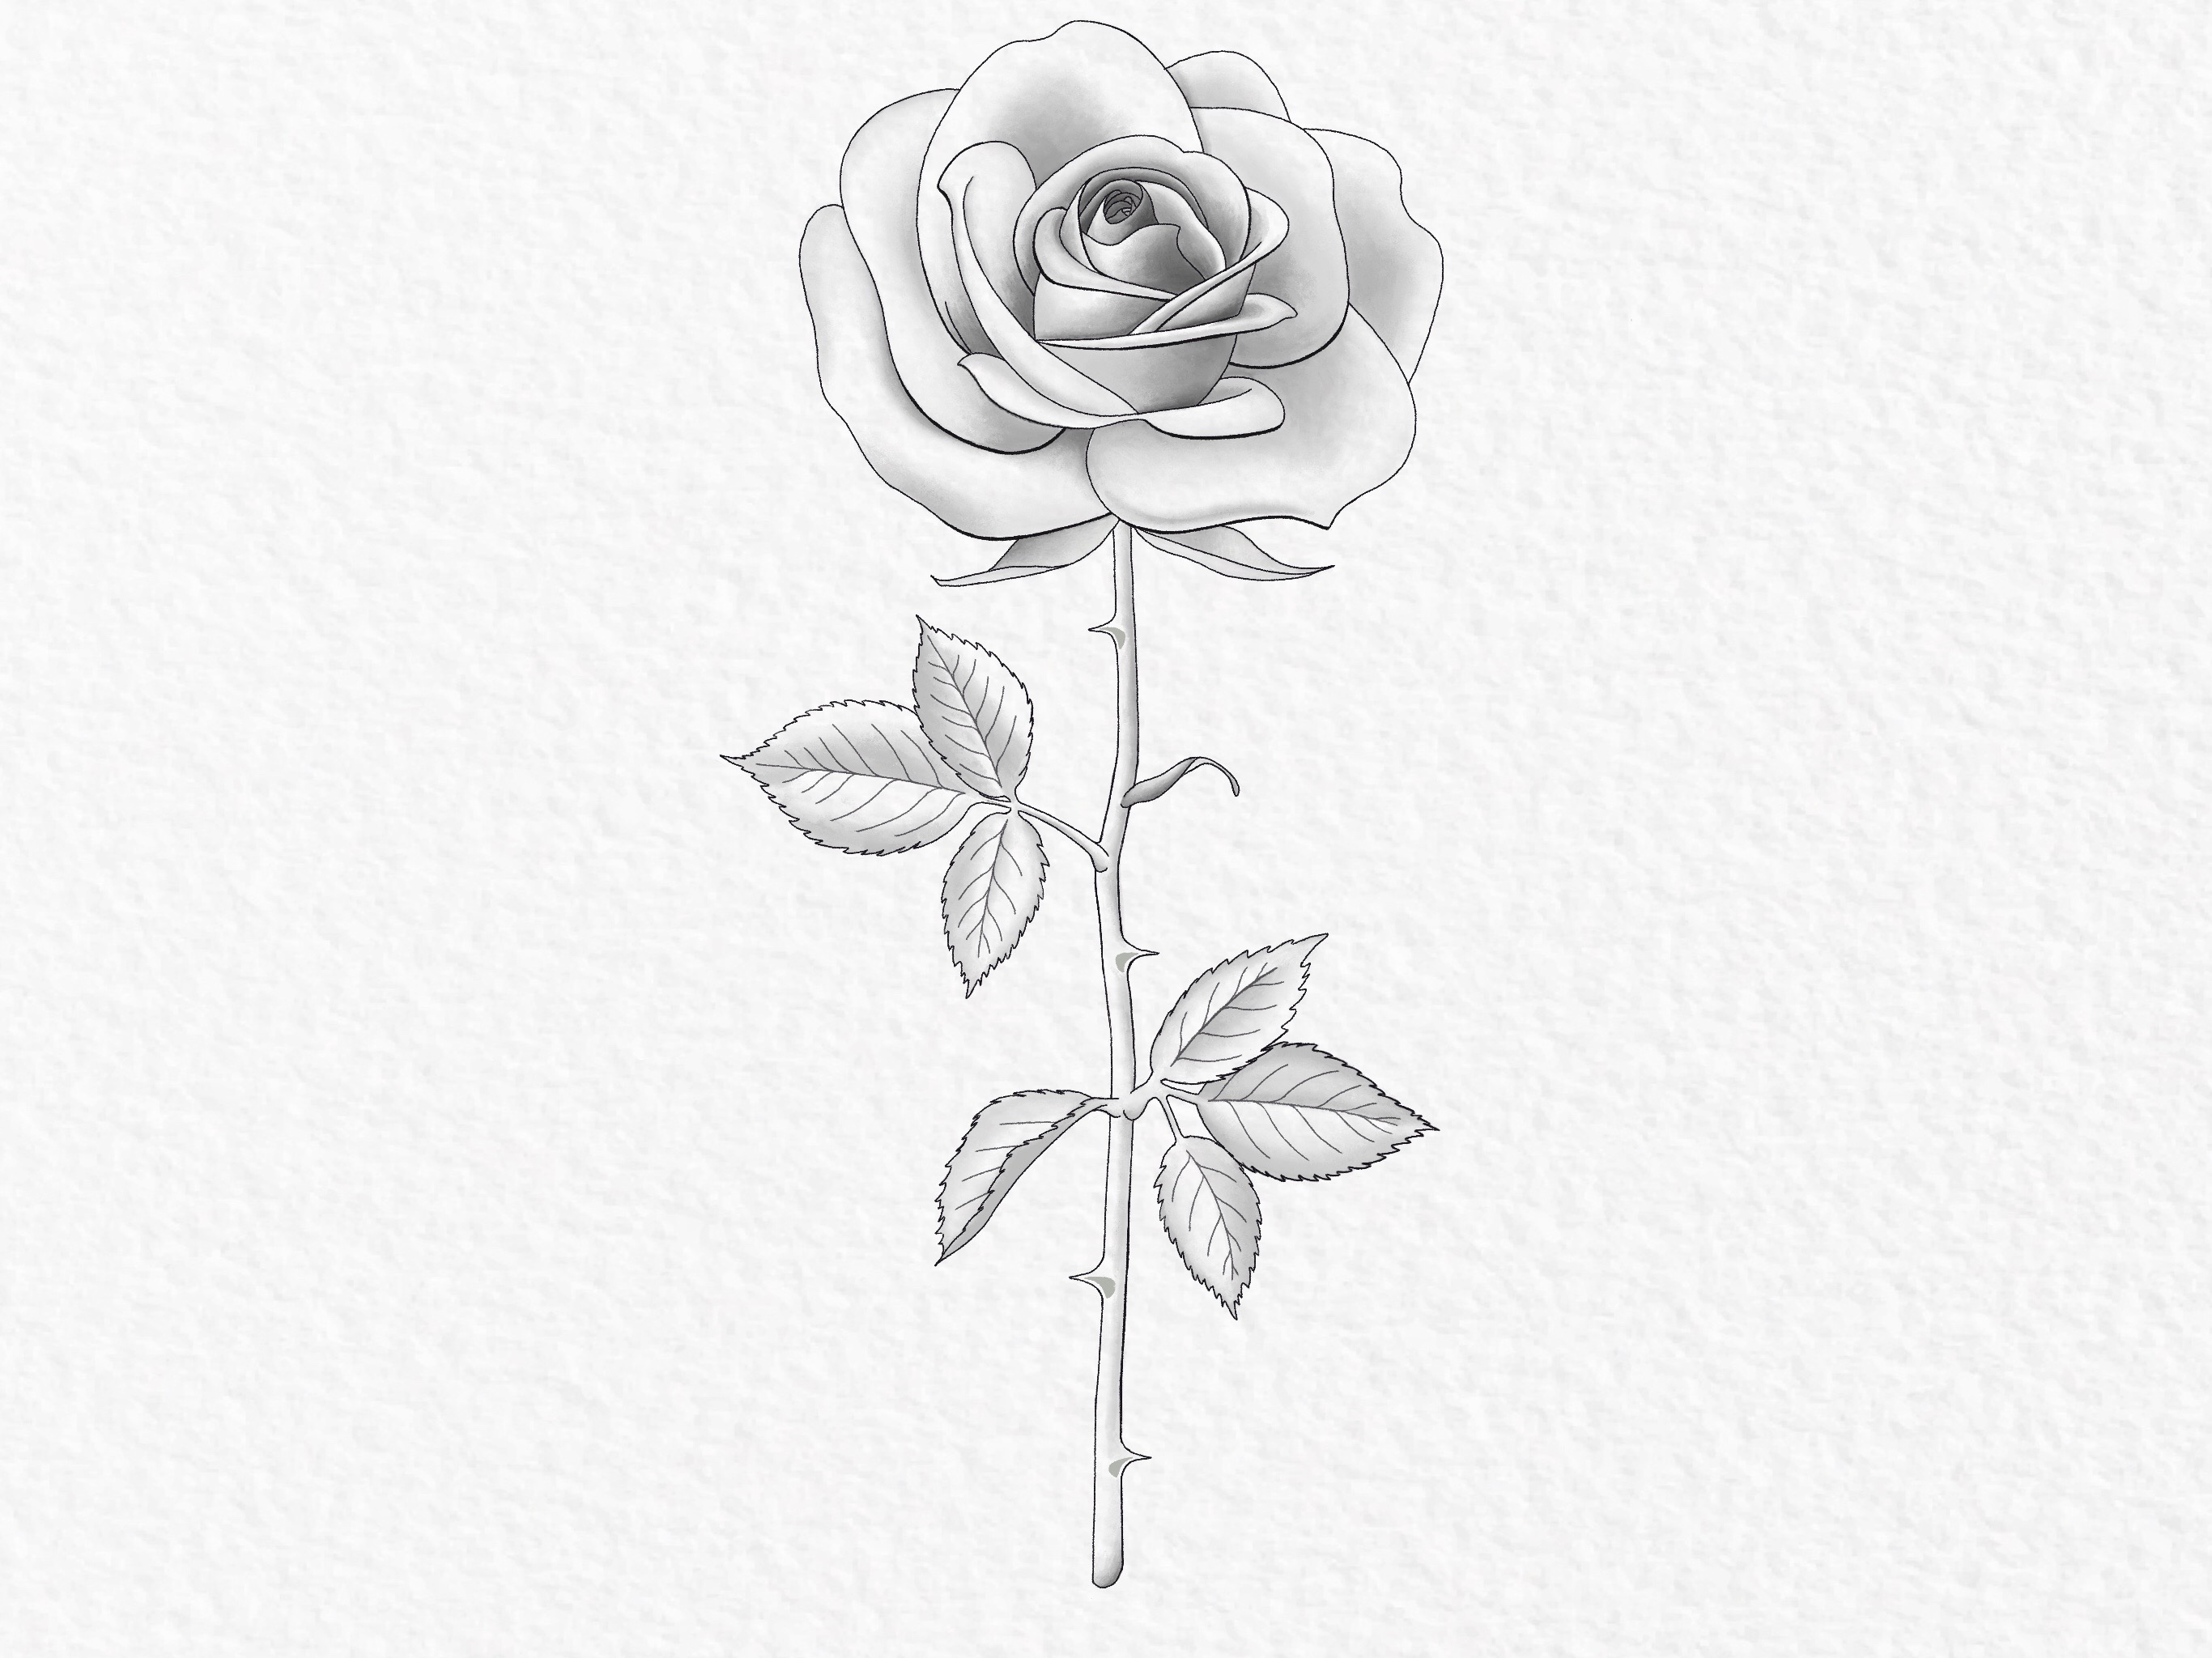 How to draw a rose, step by step drawing tutorial - step 51